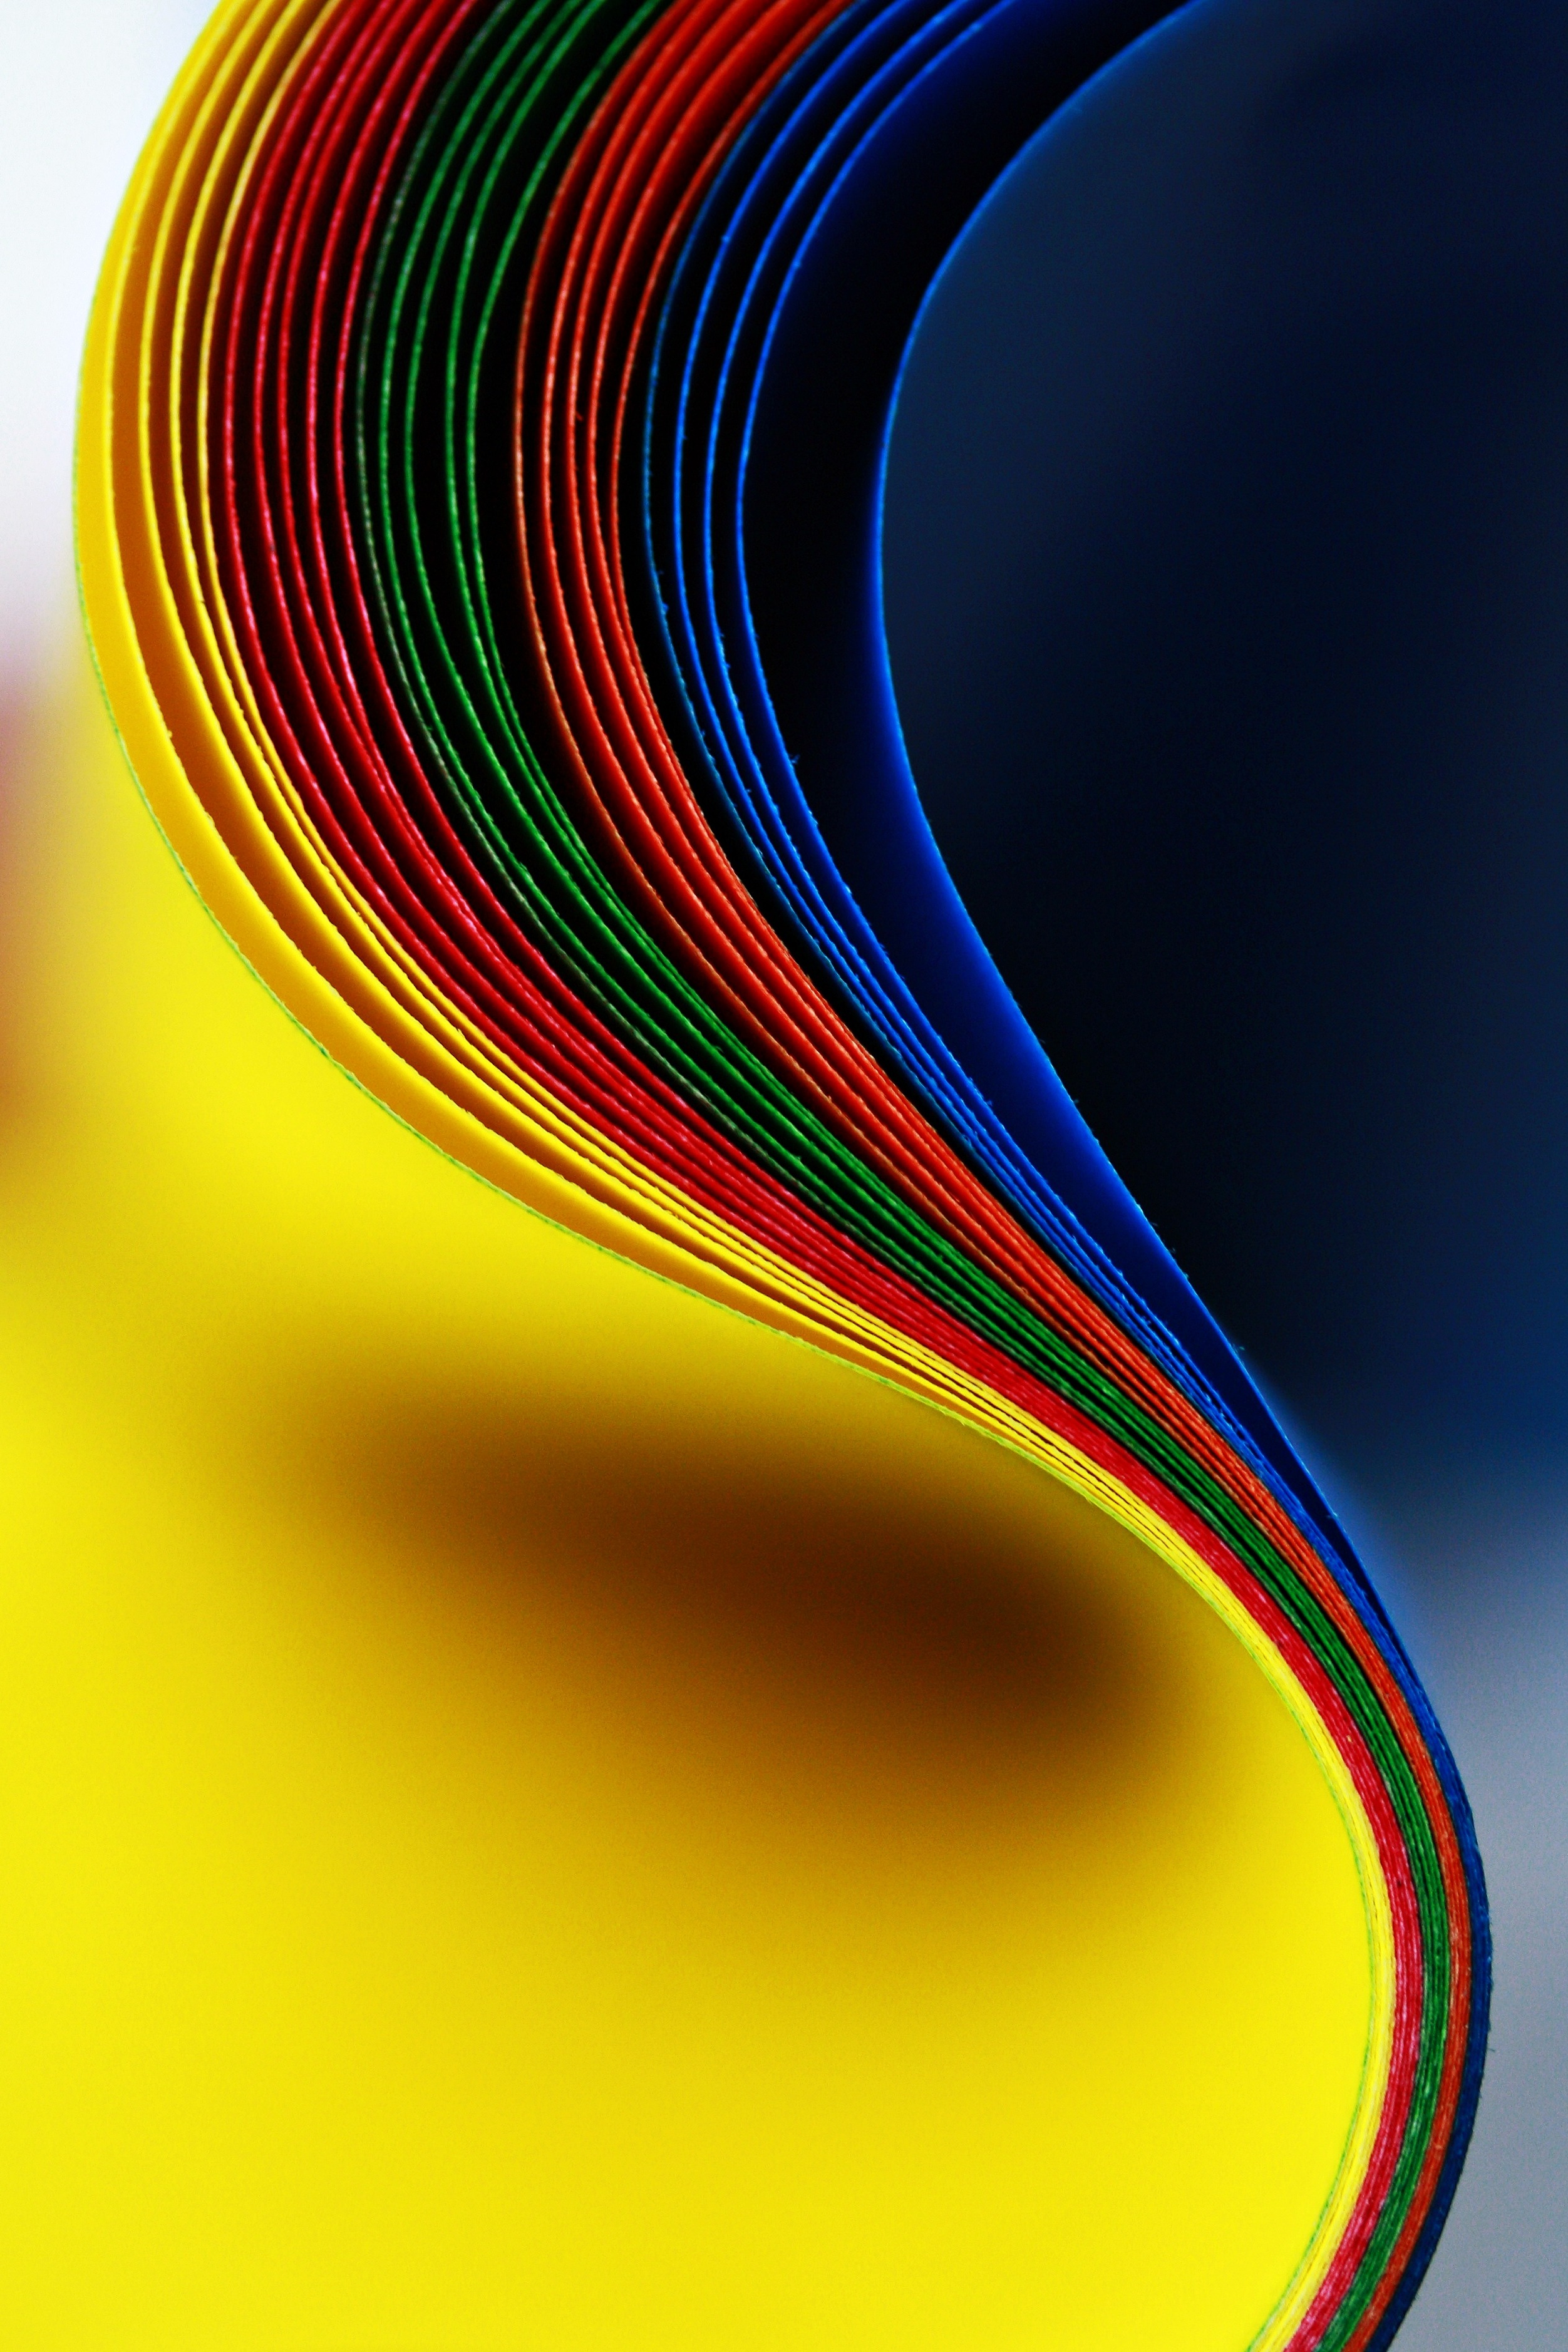 Free Image, abstract, spiral, wave, line, color, colorful, yellow, paper, still life, circle, font, illustration, design, shape, unusual, warped, macro photography, warp, computer wallpaper, fractal art 2504x3756